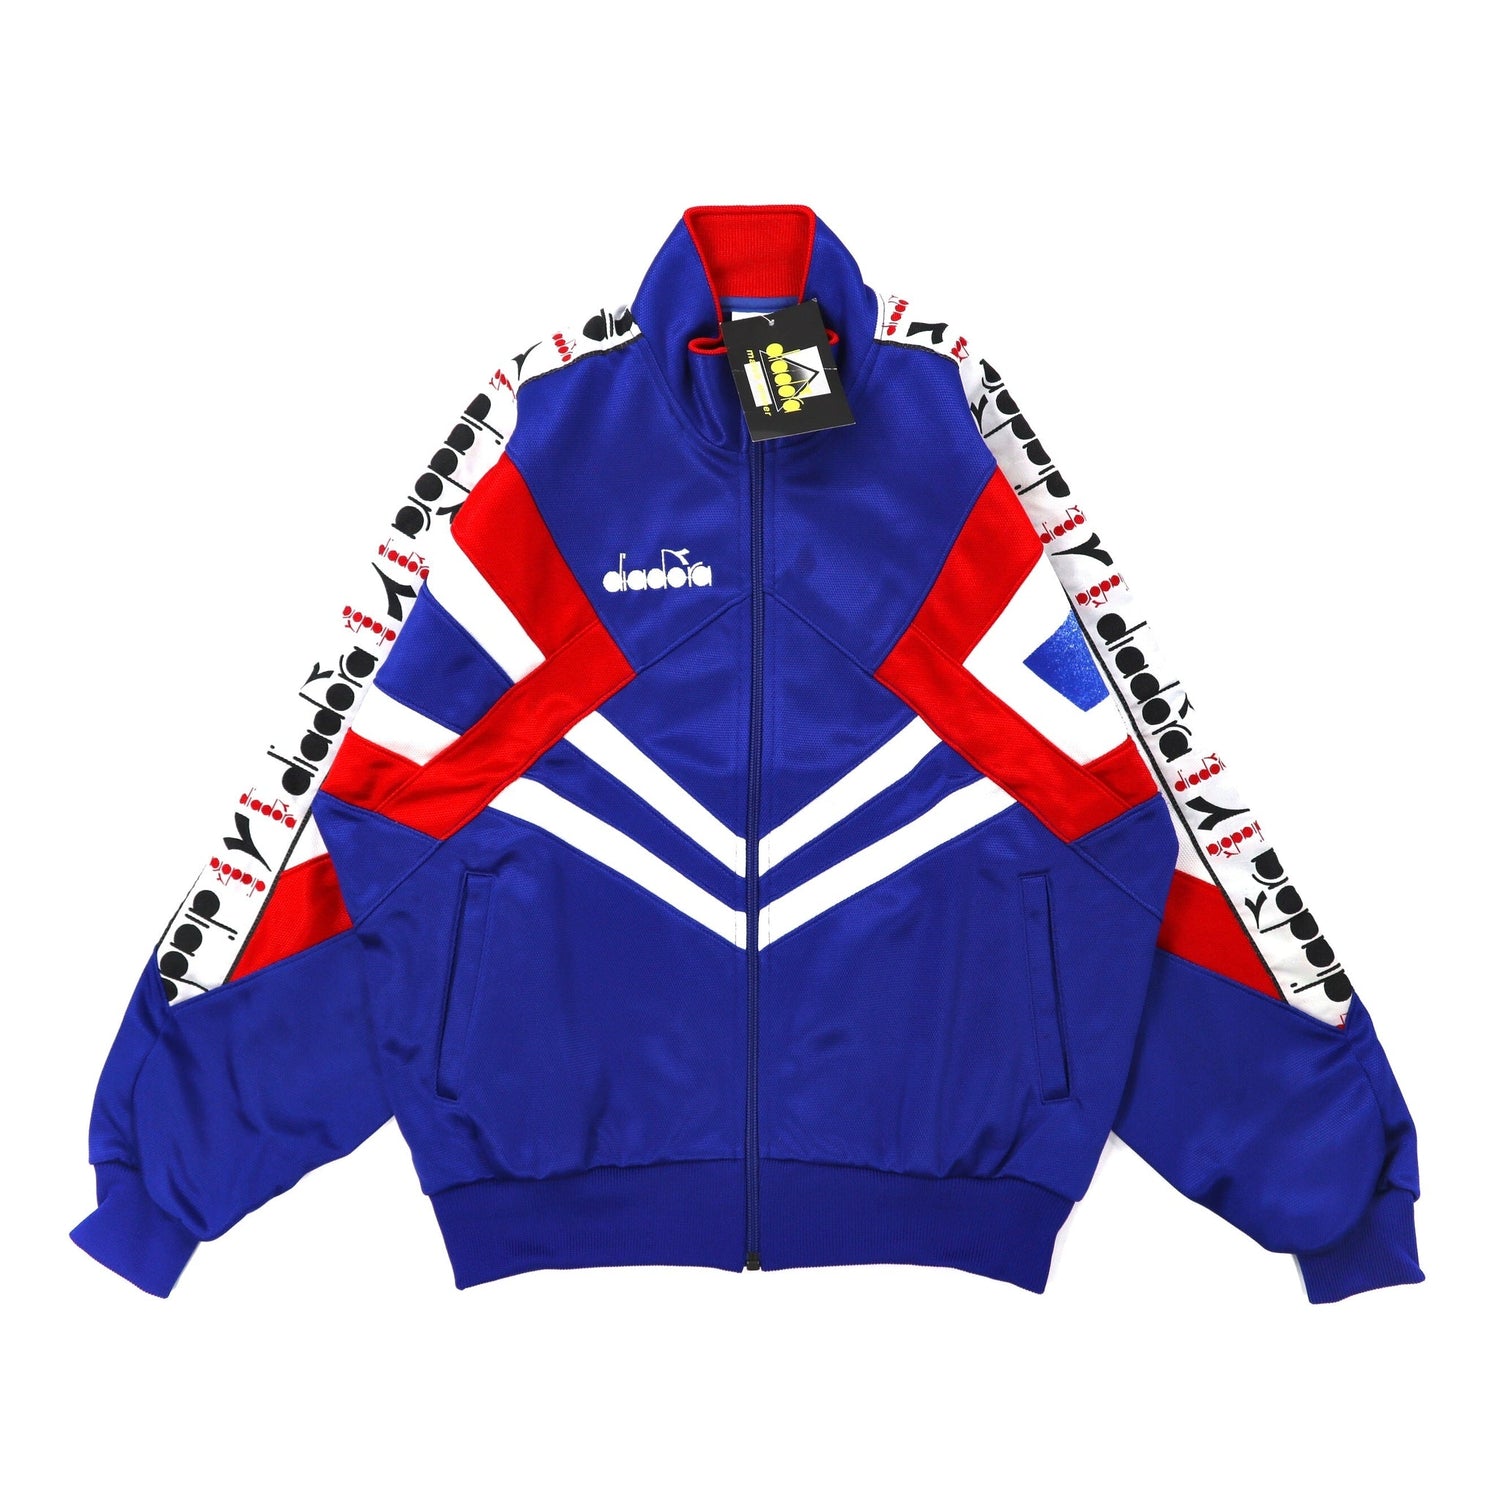 DIADORA TRACK JACKET S Blue Polyester side line logo embroidery